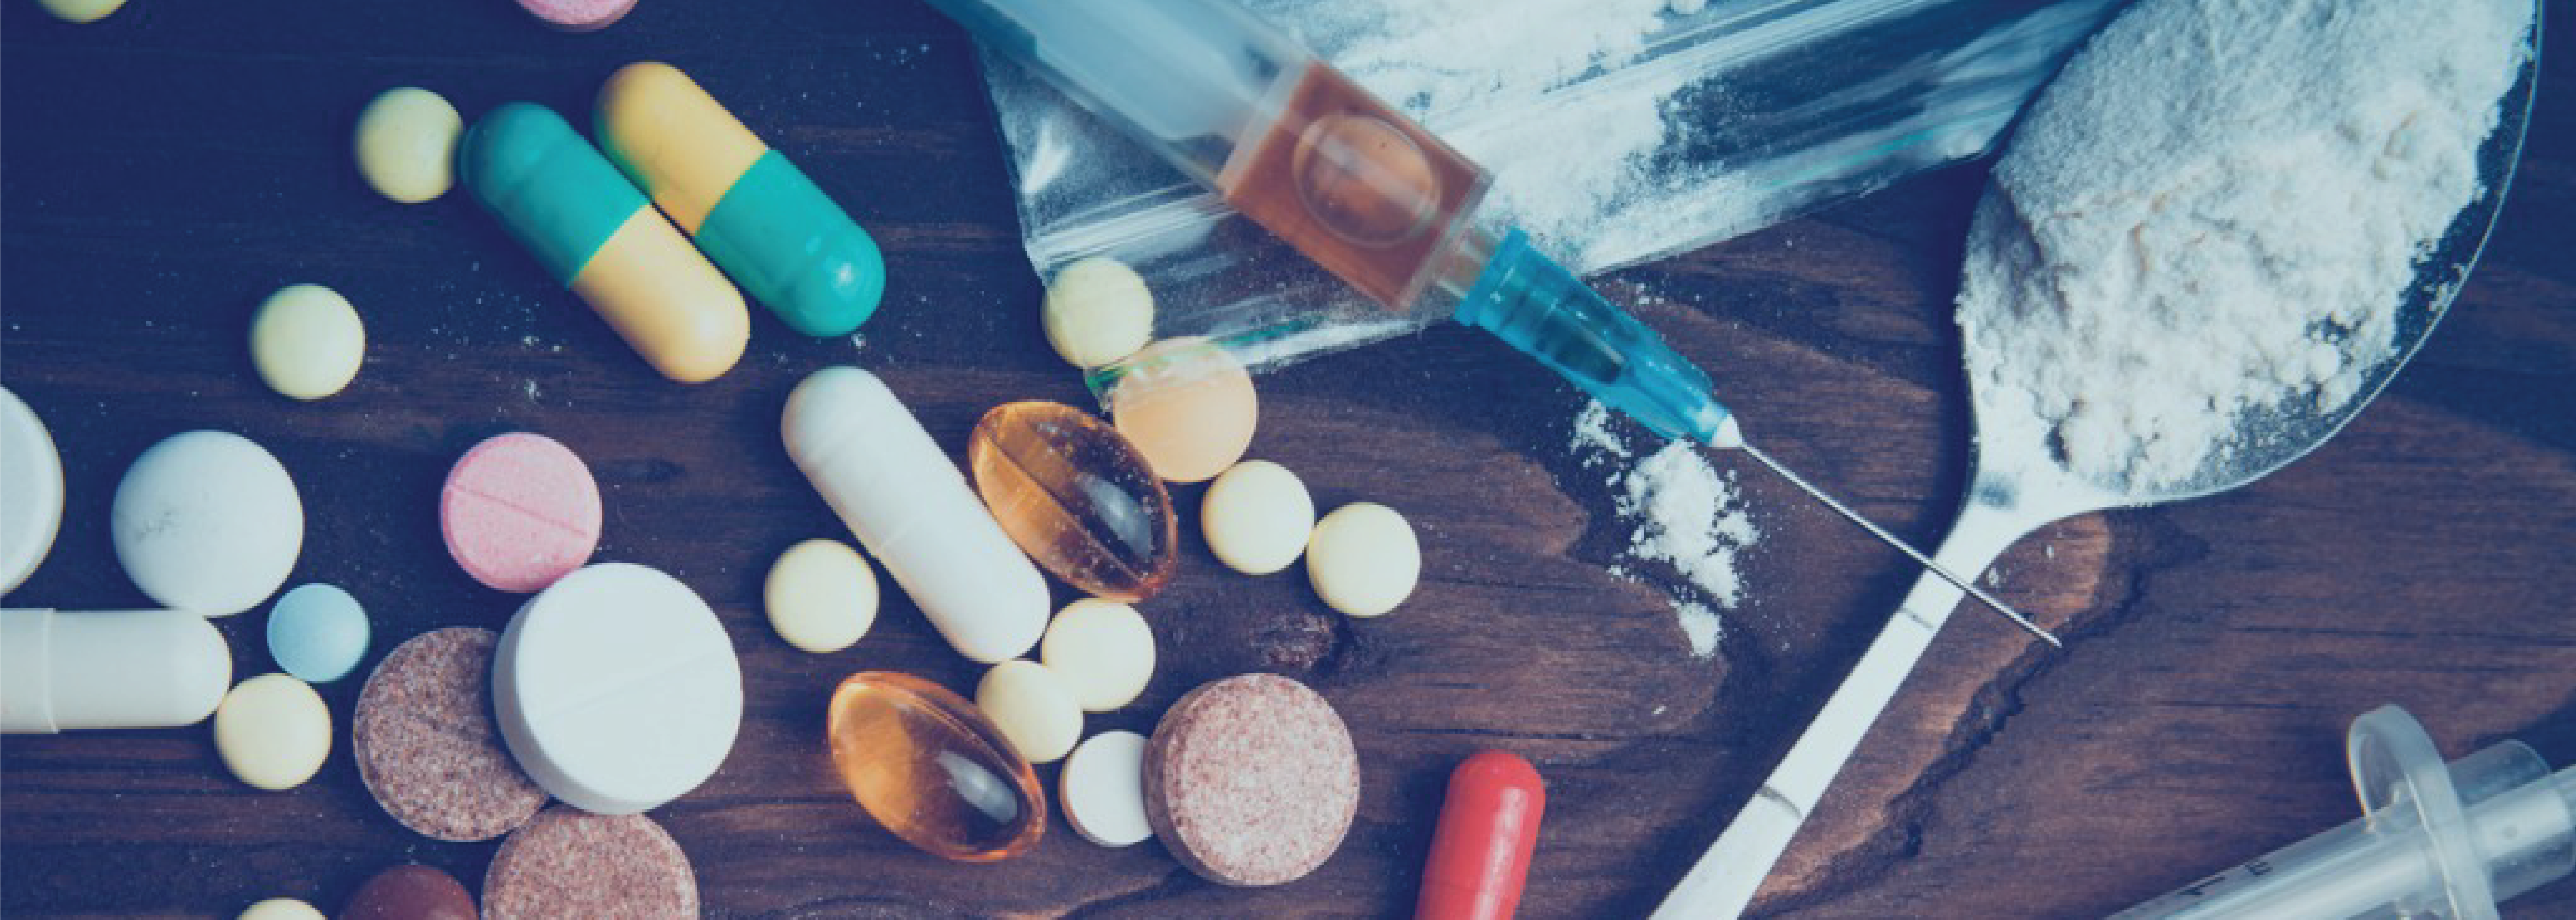 various types of drugs including cocaine, pills and needles